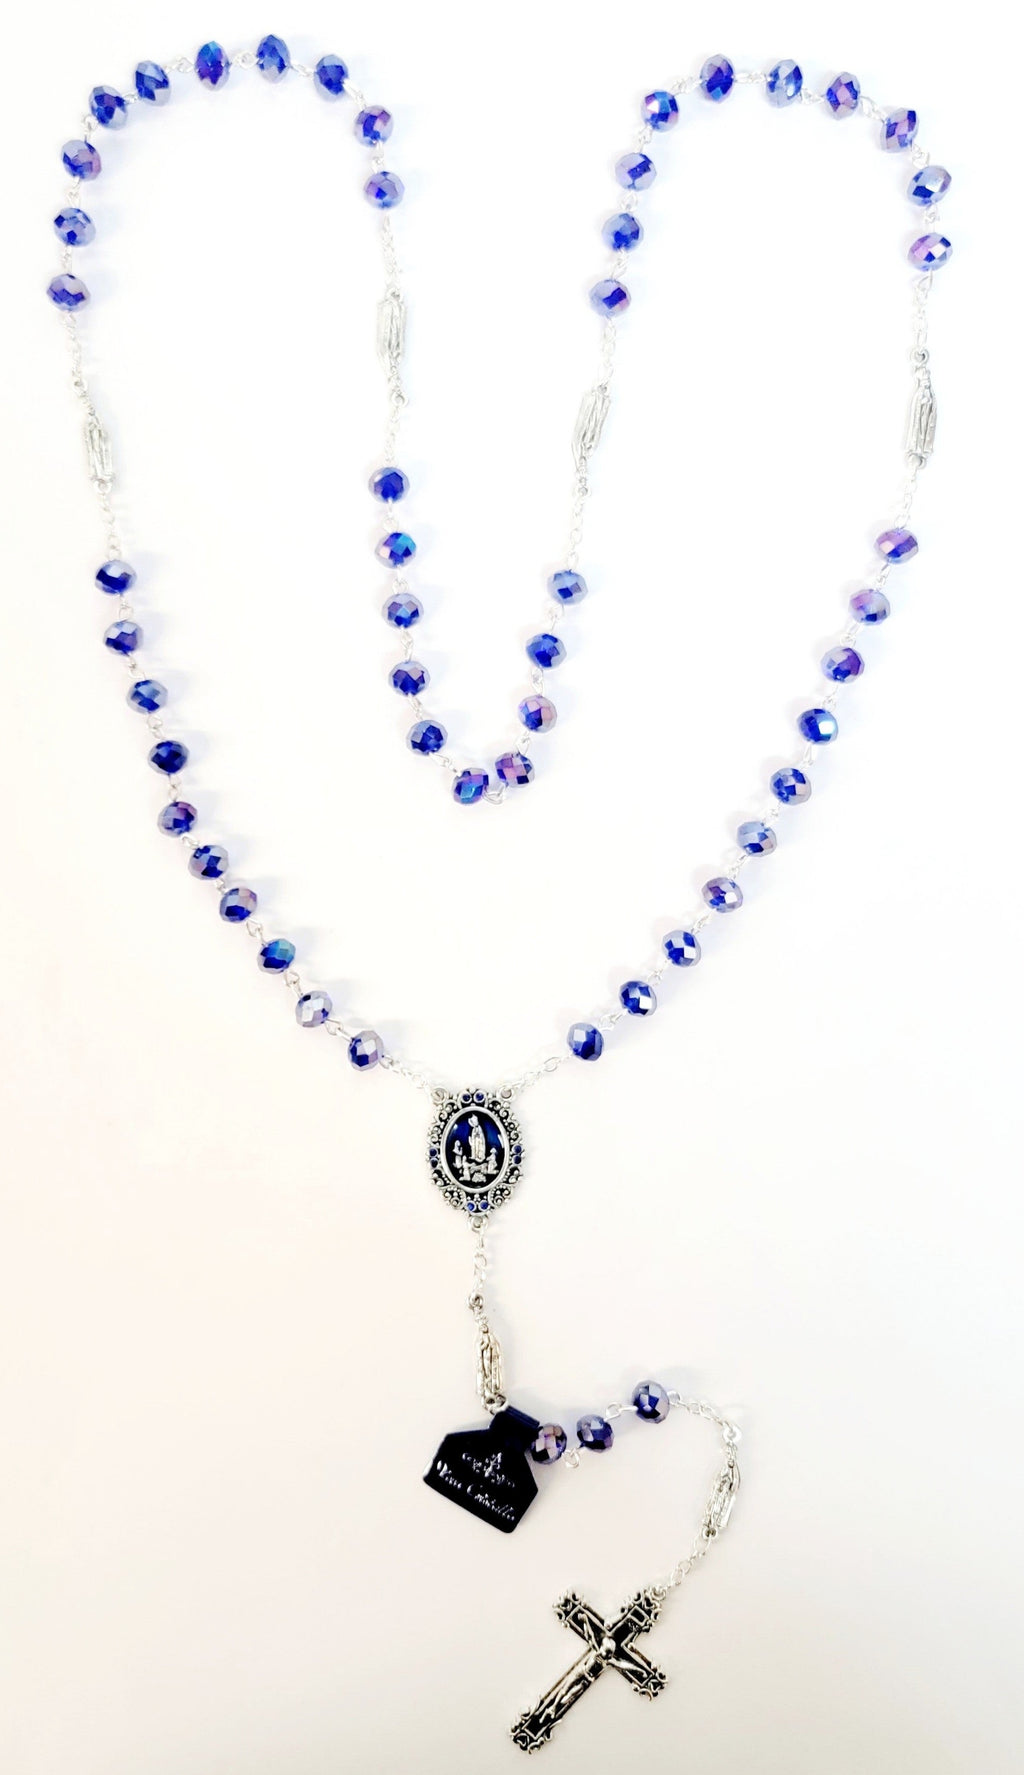 Our Lady of Fatima Blue Rosary